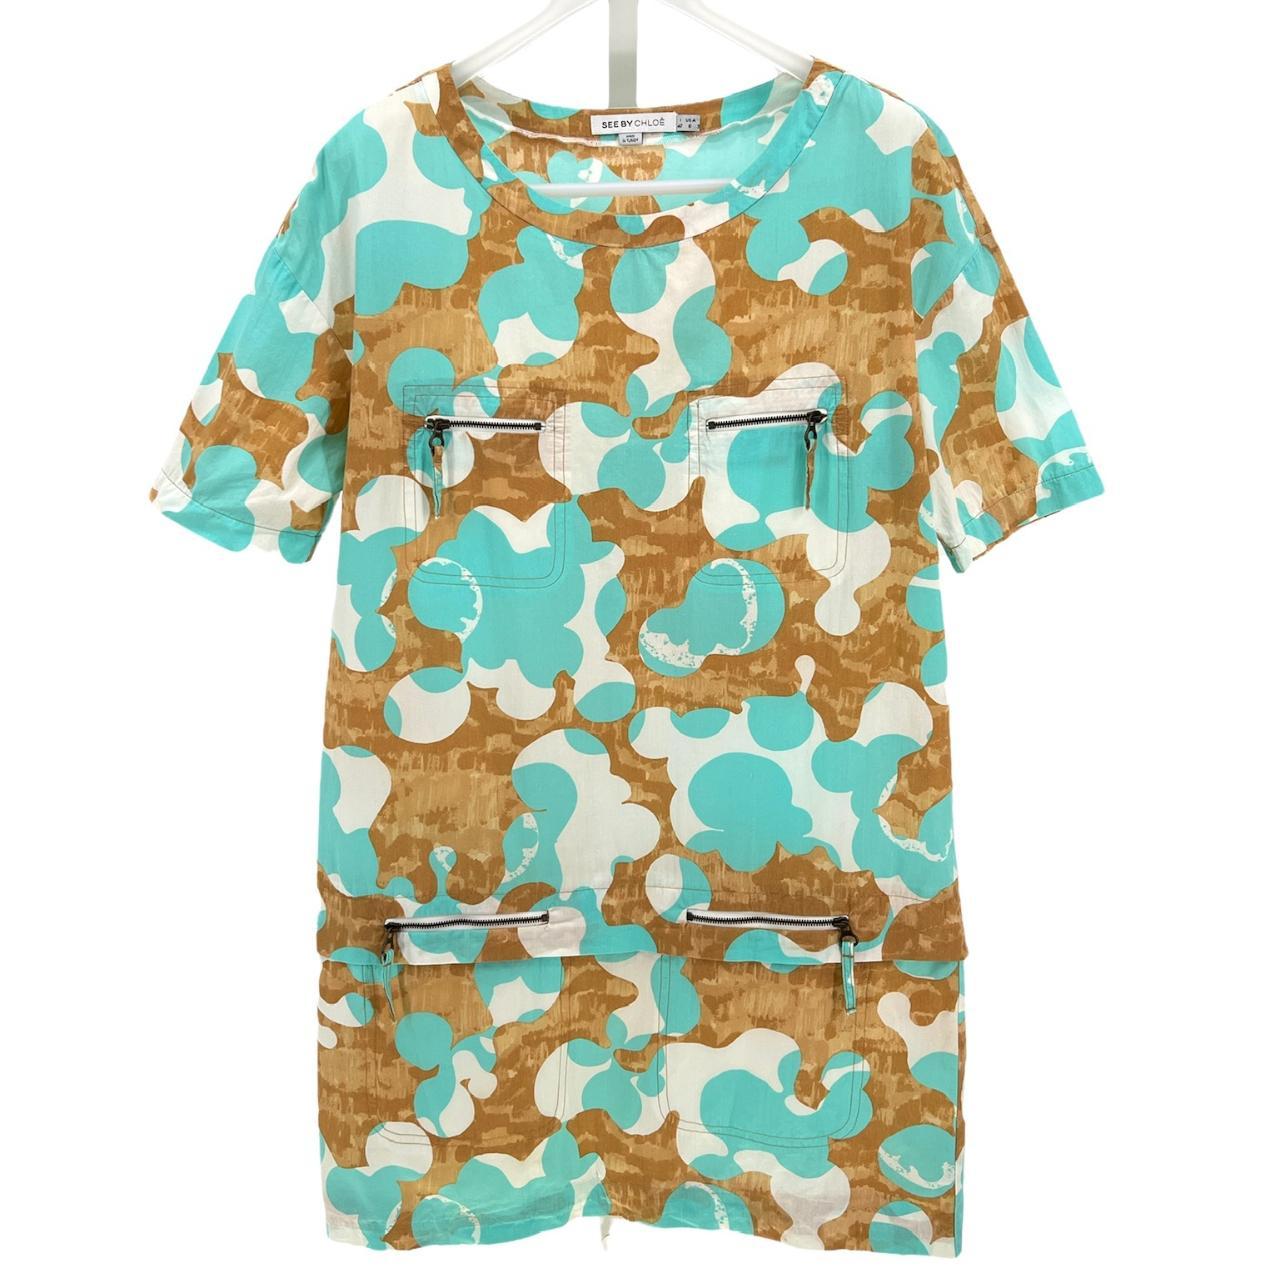 Product Image 1 - See by Chloé Shift Dress.

Pop-arty,